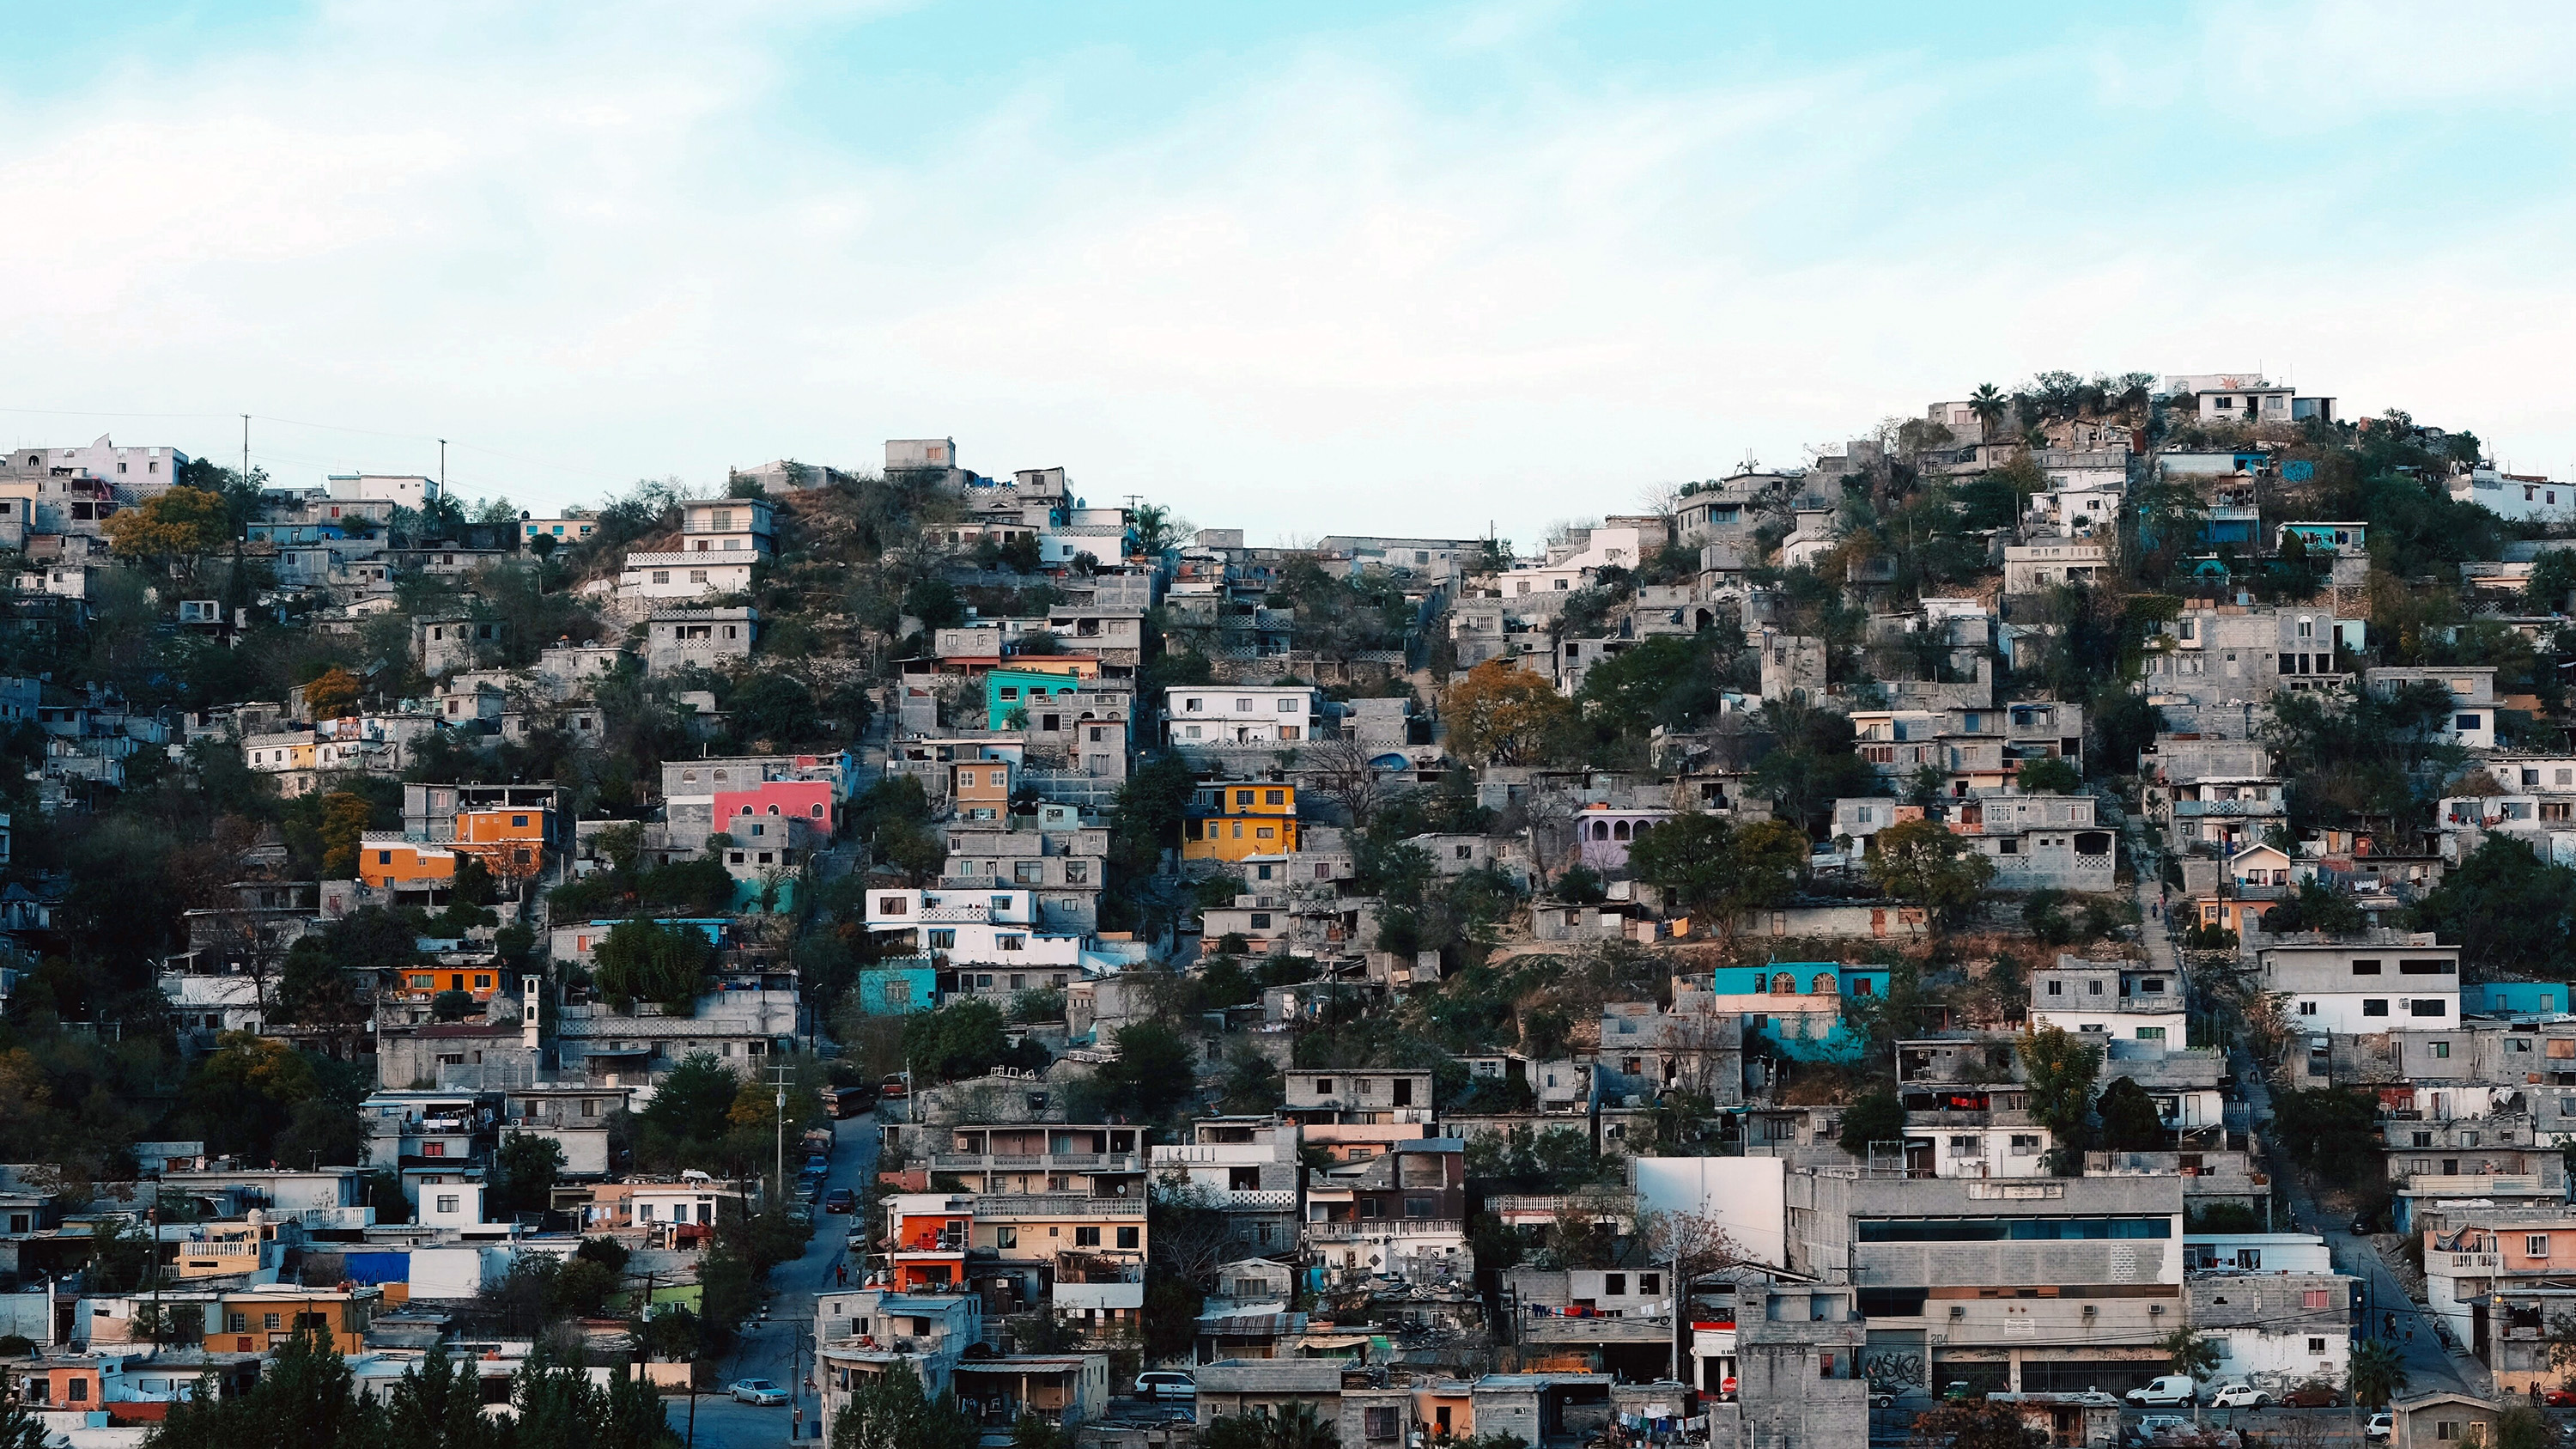 Monterrey, Mexico, is one of the country's primary manufacturing cities and a leading choice for foreign companies doing business in Mexico. (Daniel Lozano Valdés/Unsplash)